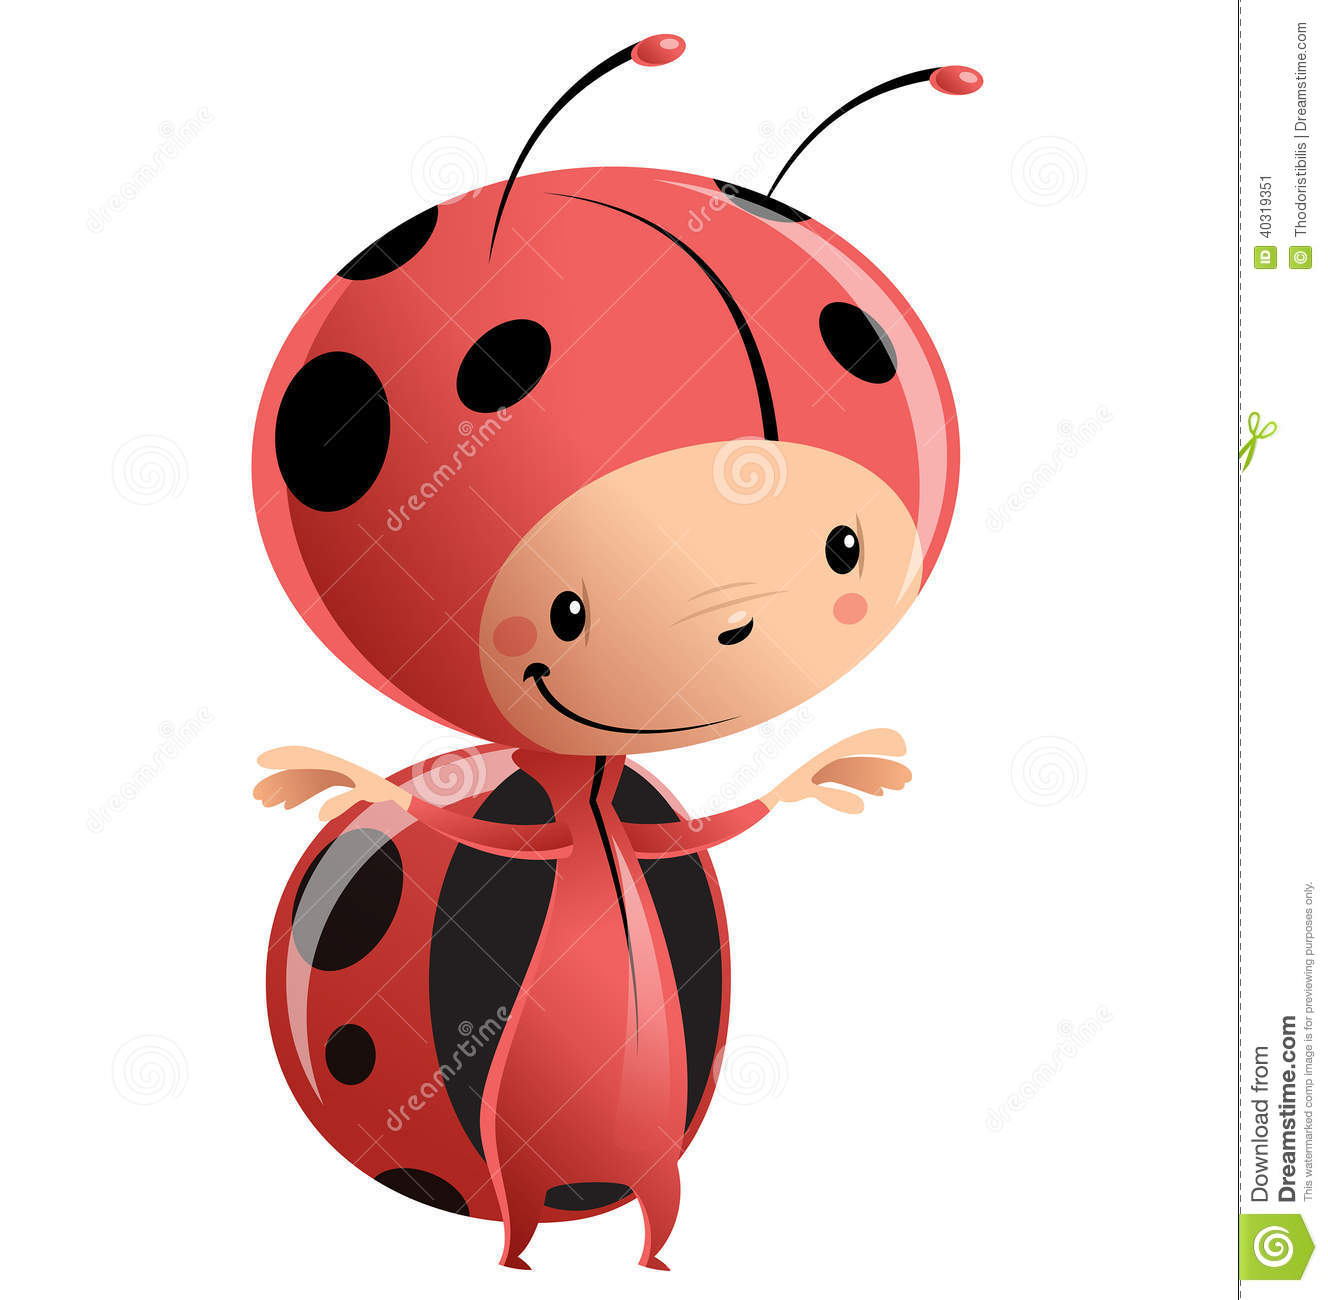 Cartoon Vector Illustration With Child In Funny Red Lady Bug Suit With